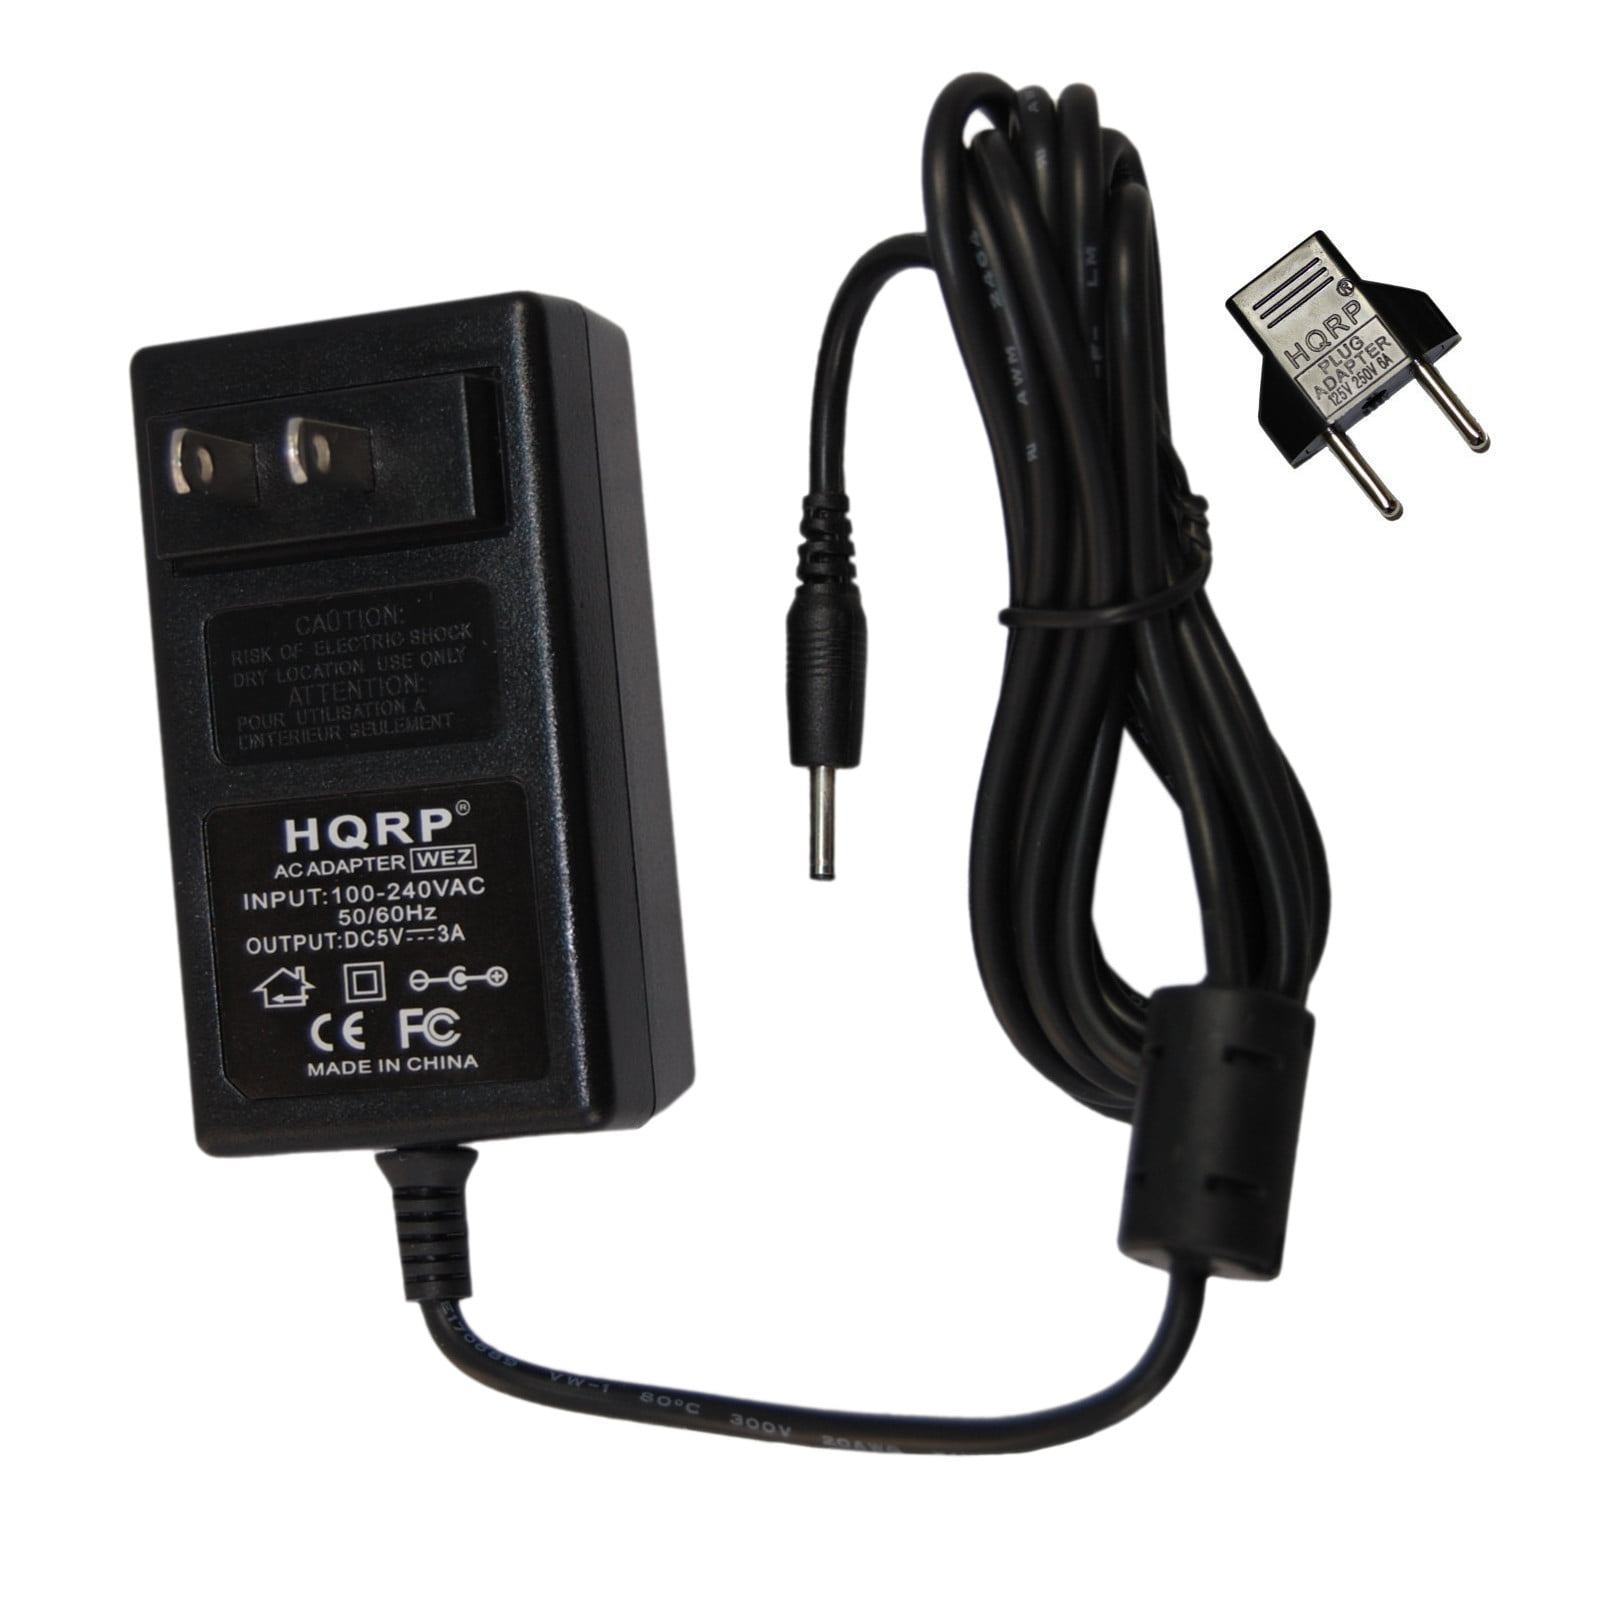 HQRP AC Adapter for LaCie Brick Mobile Hard Drive / Little Disk design